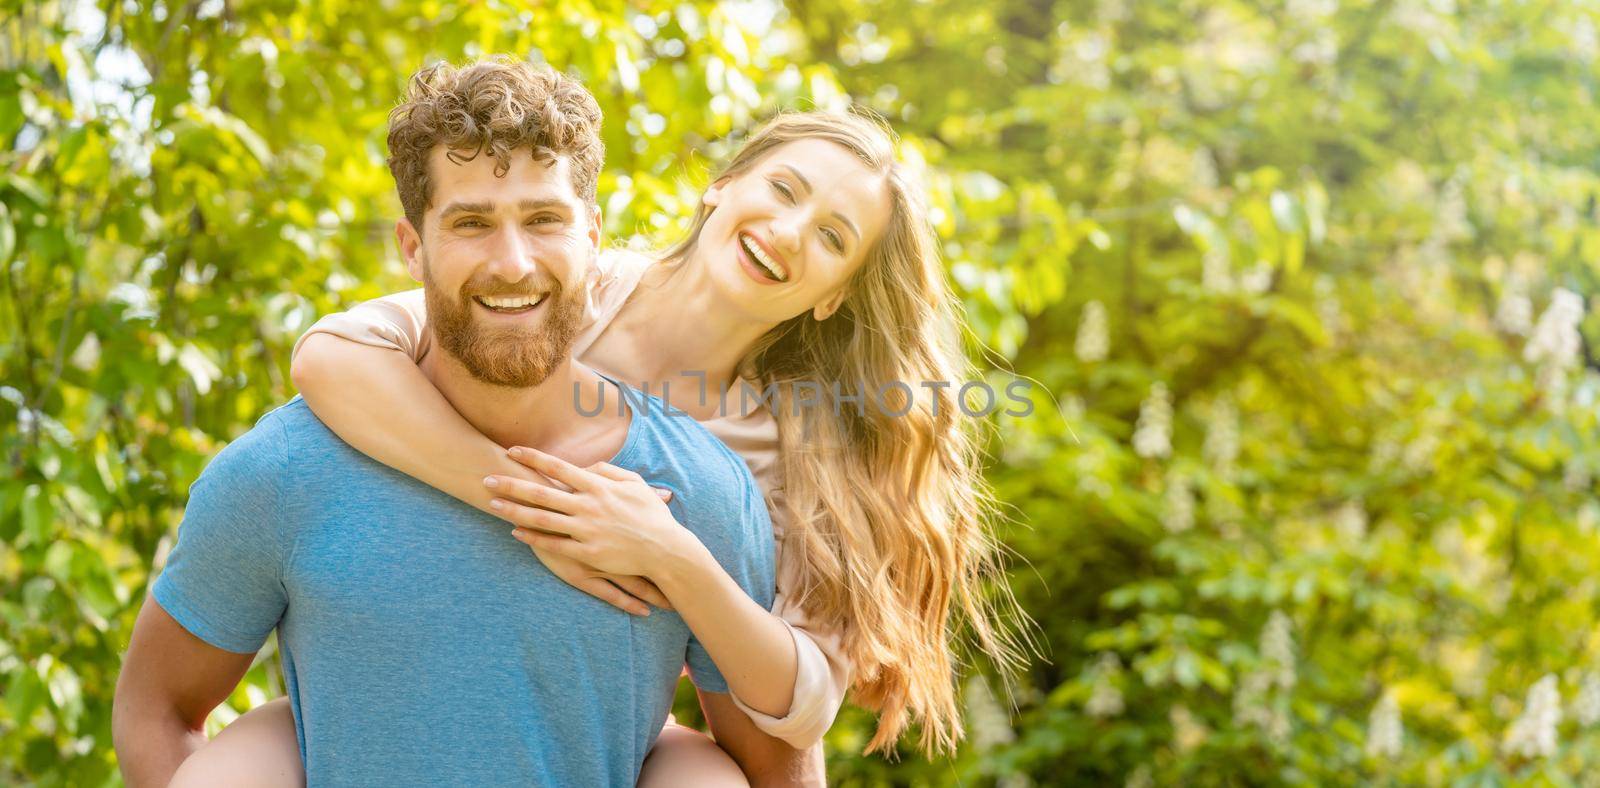 Husband is carrying his wife on his back being a strong and reliable partner